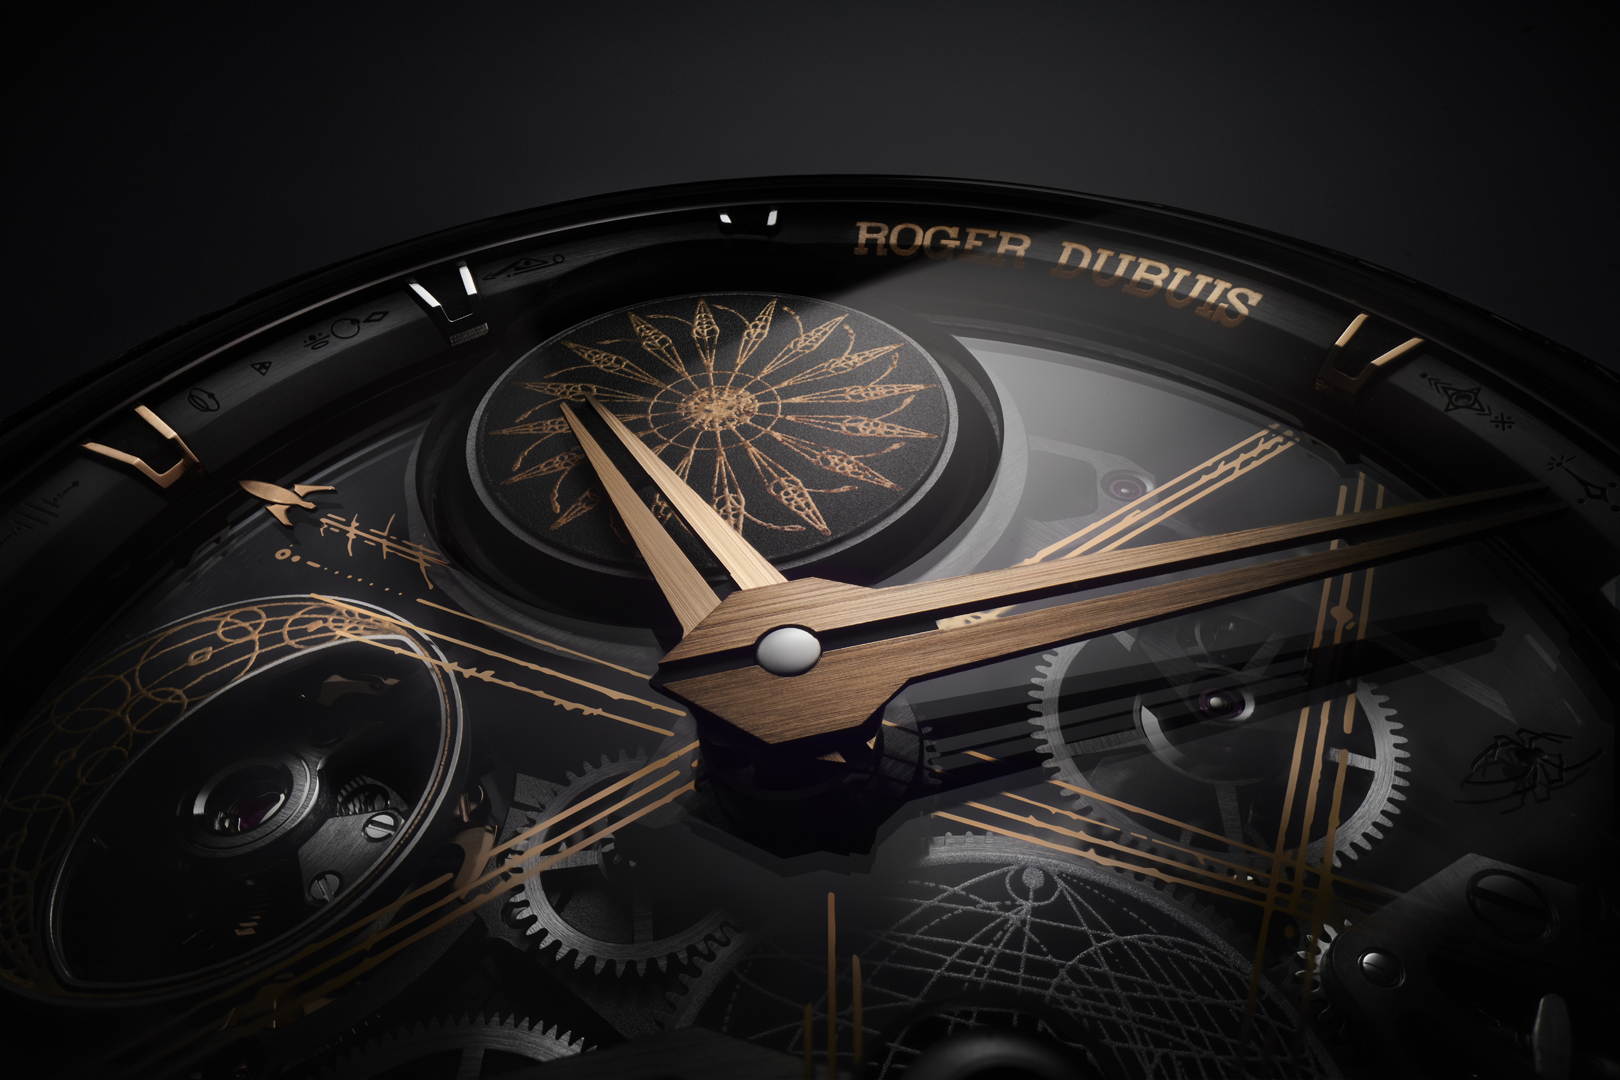 Roger Dubuis Excalibur Knights of the Round Table II RDDBEX0495 for  $257,000 for sale from a T… | Luxury watches for men, Roger dubuis excalibur,  Monochrome watches